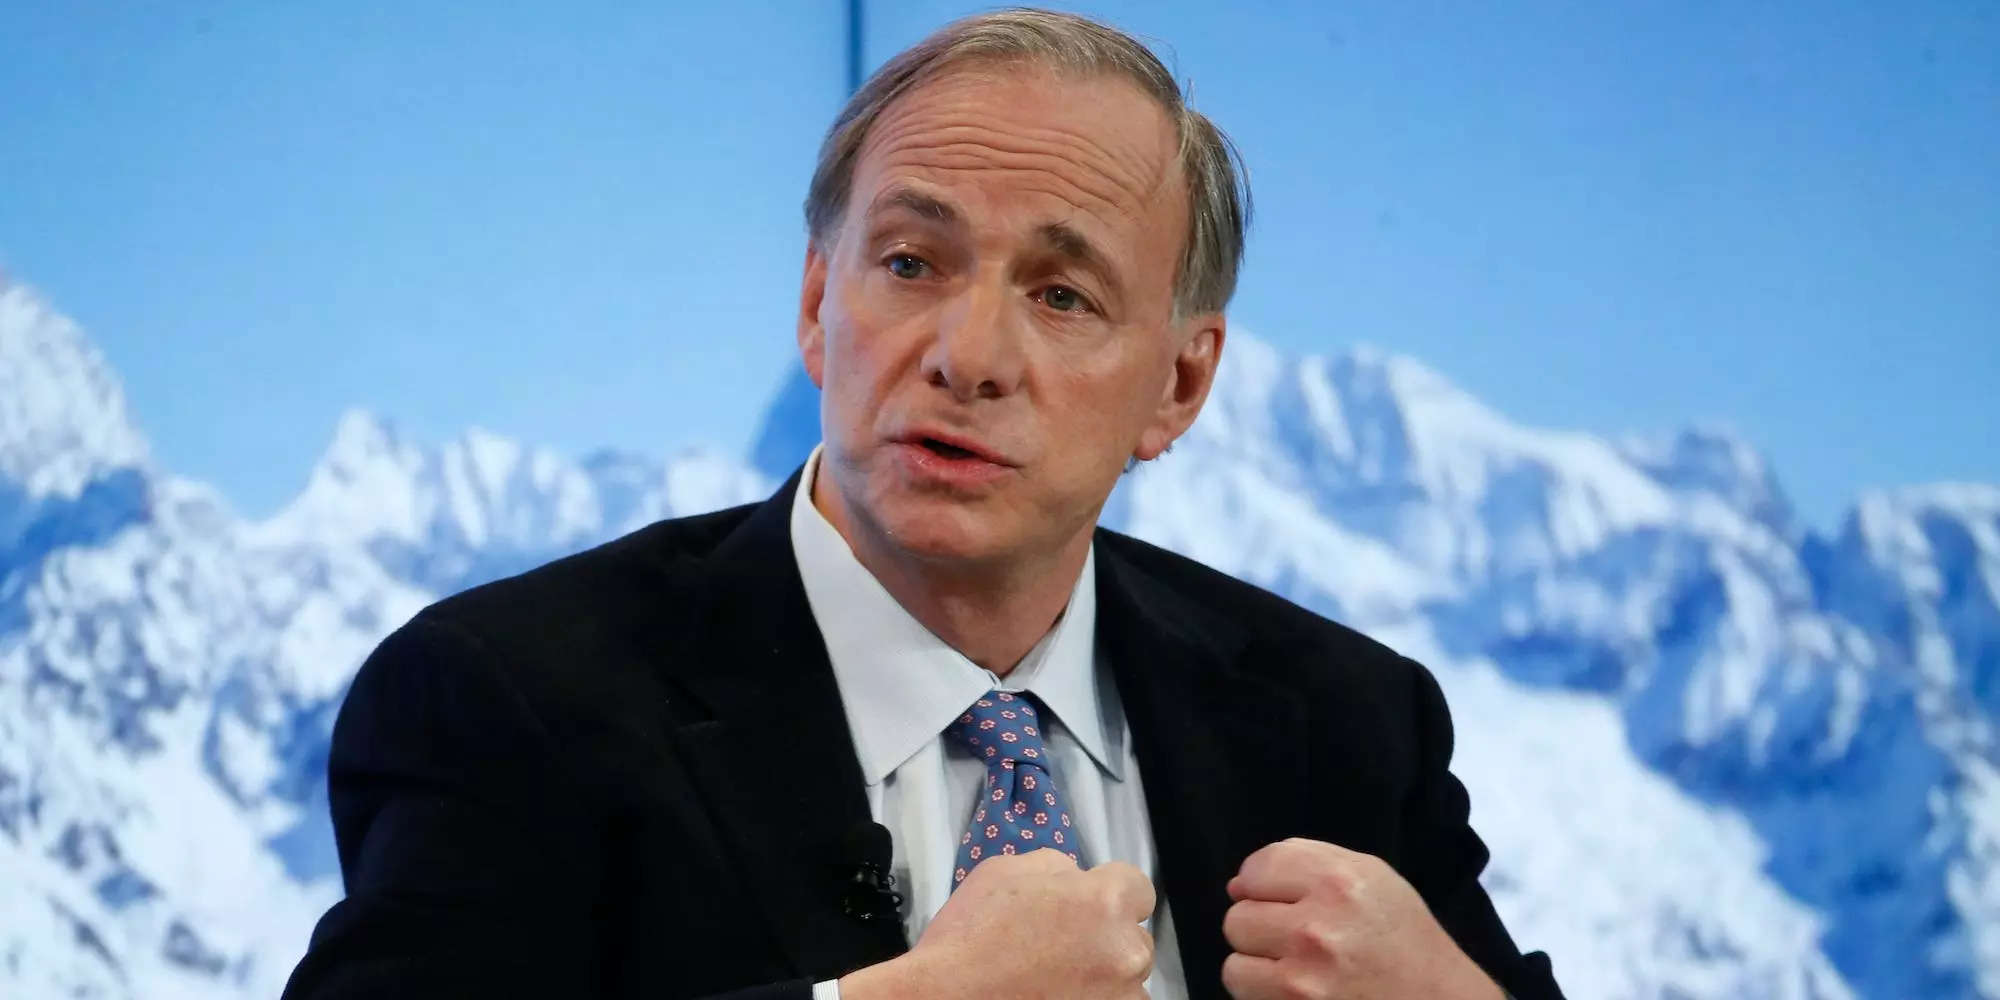 Billionaire investor Ray Dalio predicts the Fed will raise interest rates to at least 4.5% — and warns a Great Recession is likely